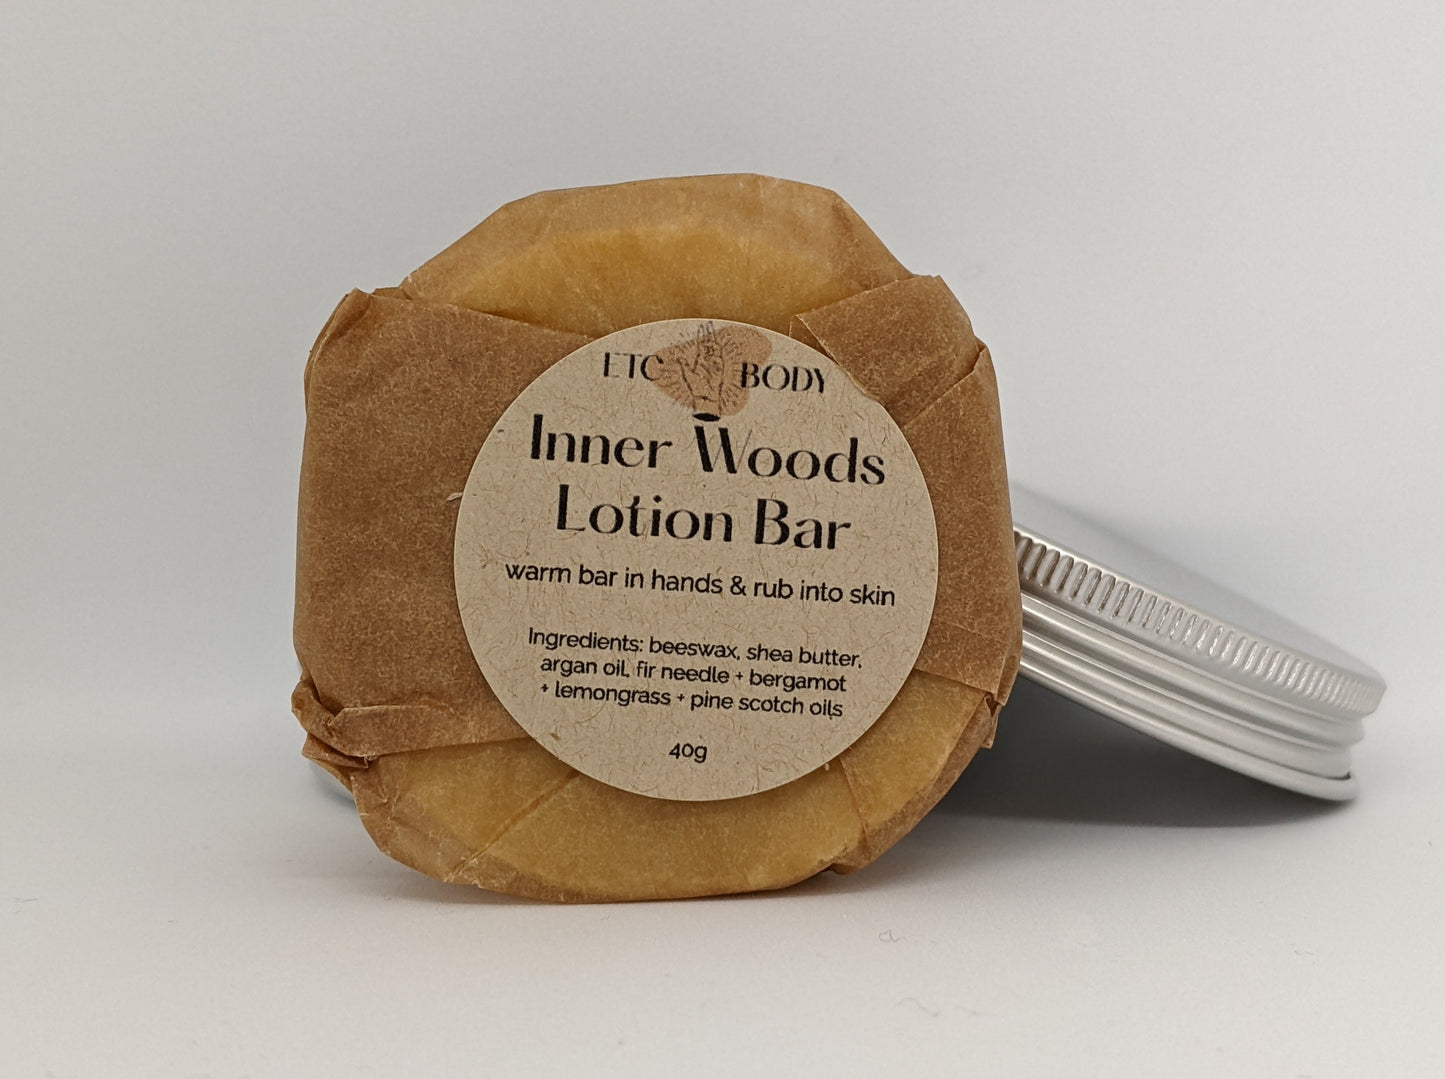 Inner Woods Lotion bar with pine scotch oils. Warm bar in hands & rub into skin.